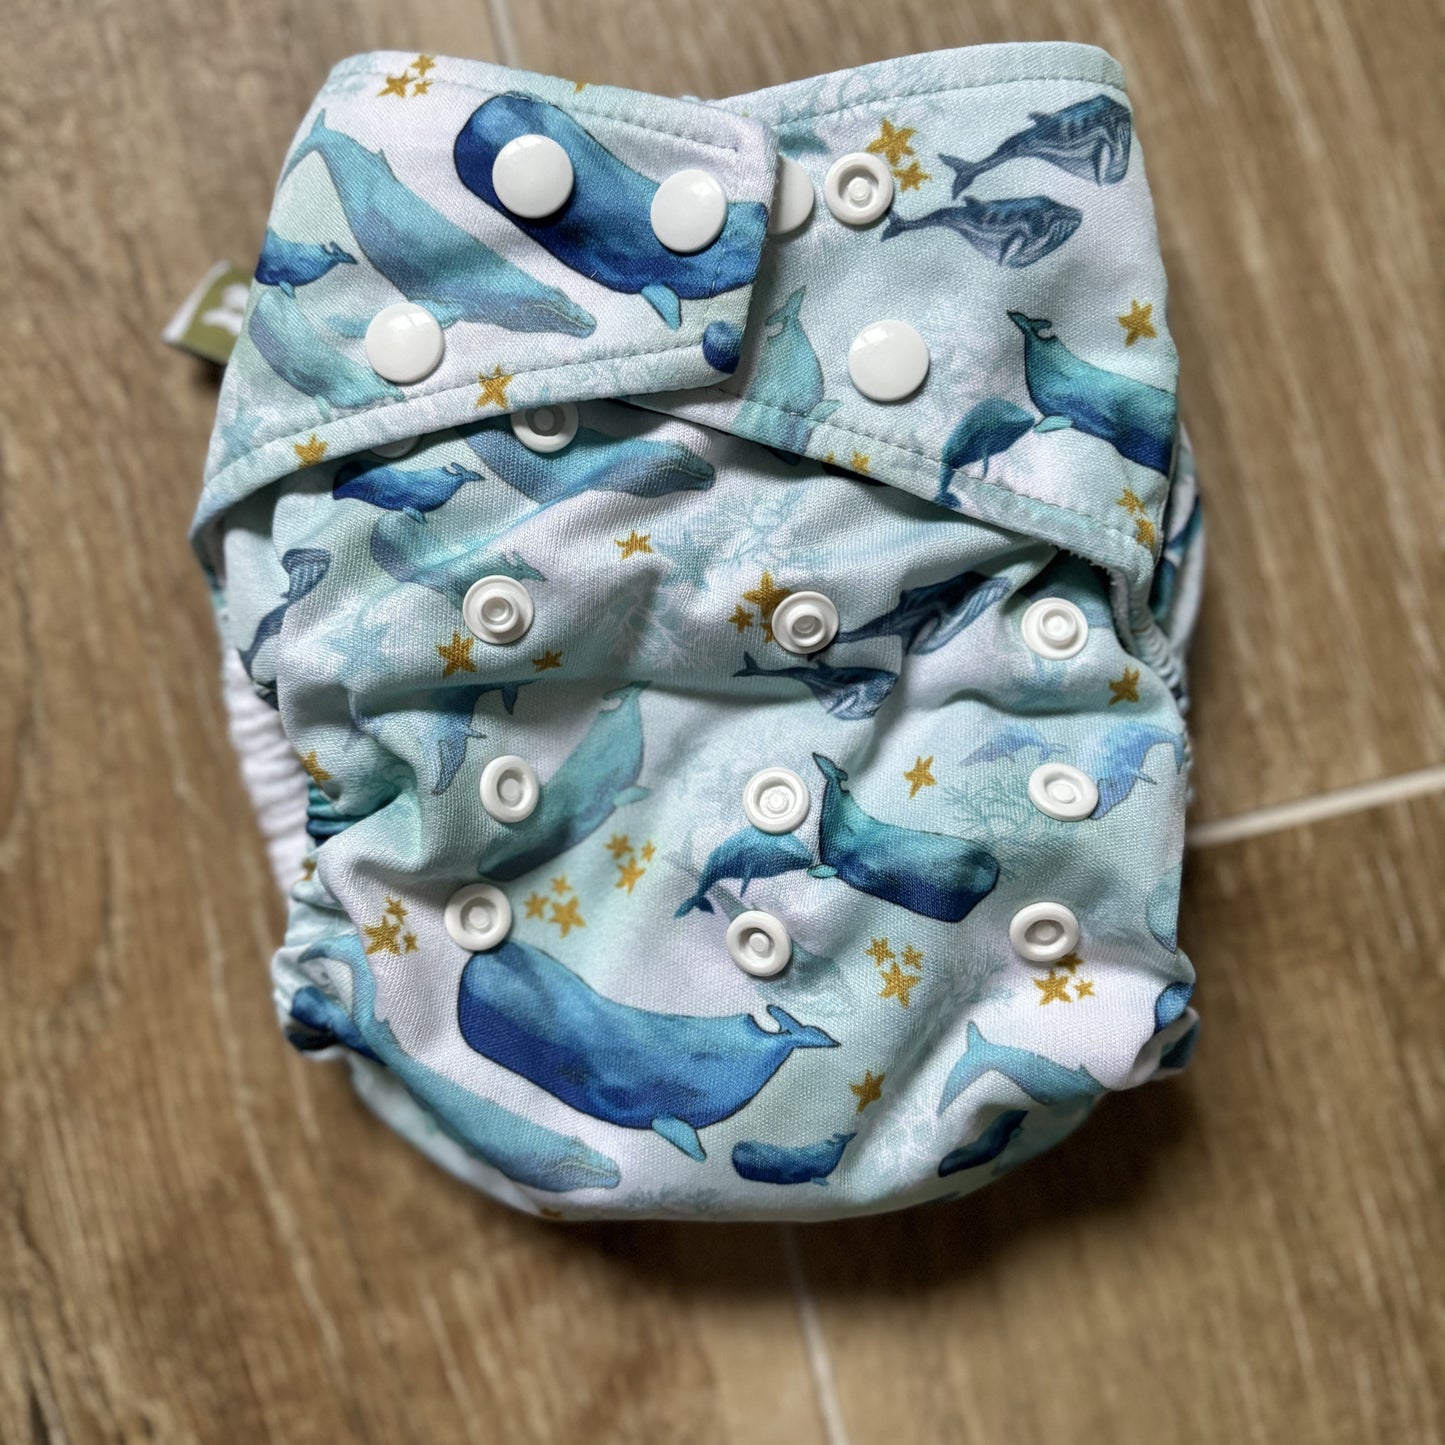 Little Lamb One Size Pocket Nappy including 2 bamboo inserts-Pocket Nappy-Little Lamb-Under the Sea-The Nappy Market